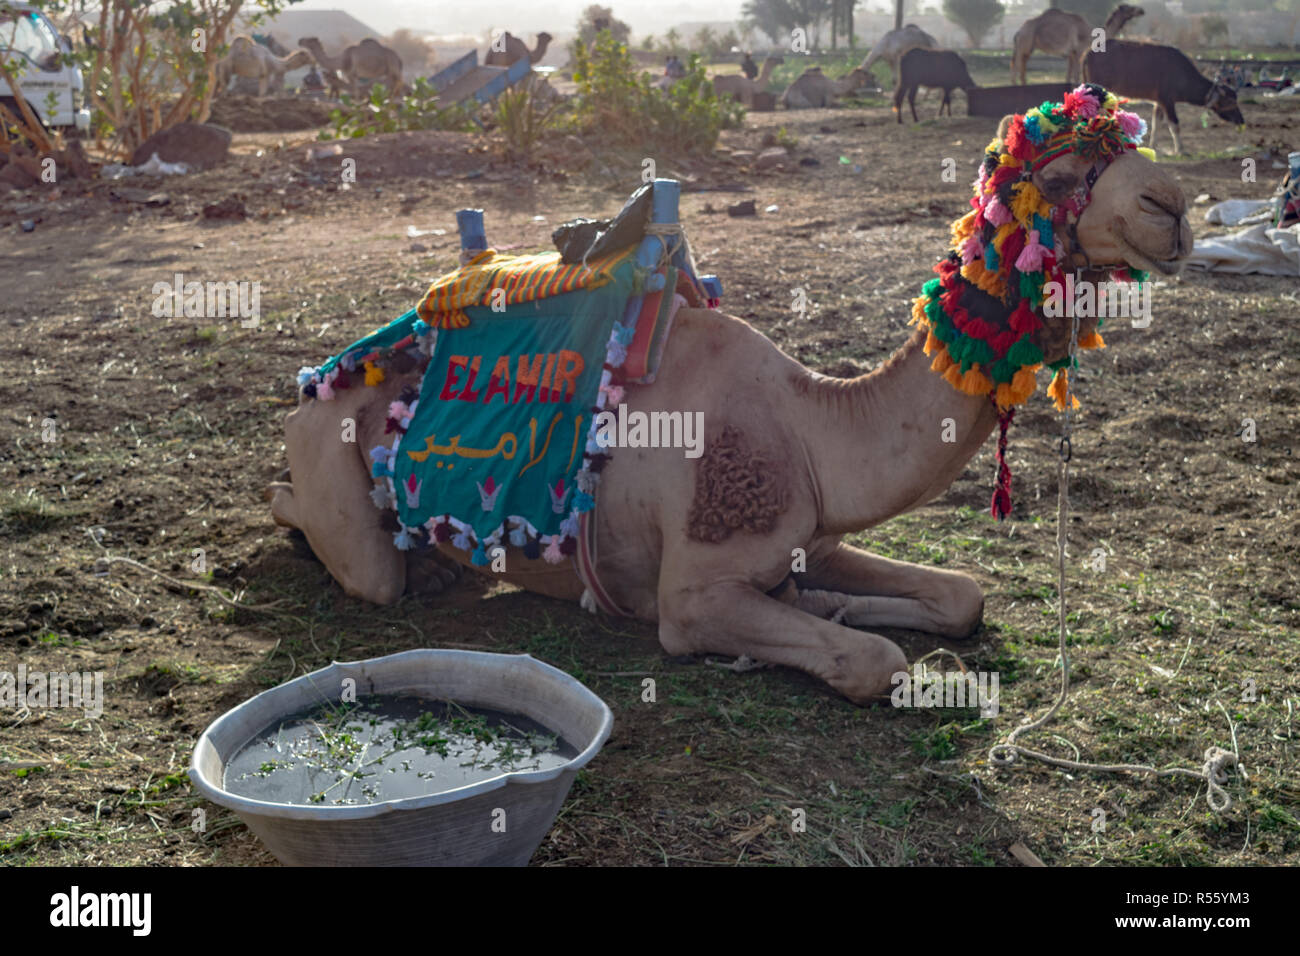 Arabian Camel with accessories look in Aswan Egypt Stock Photo